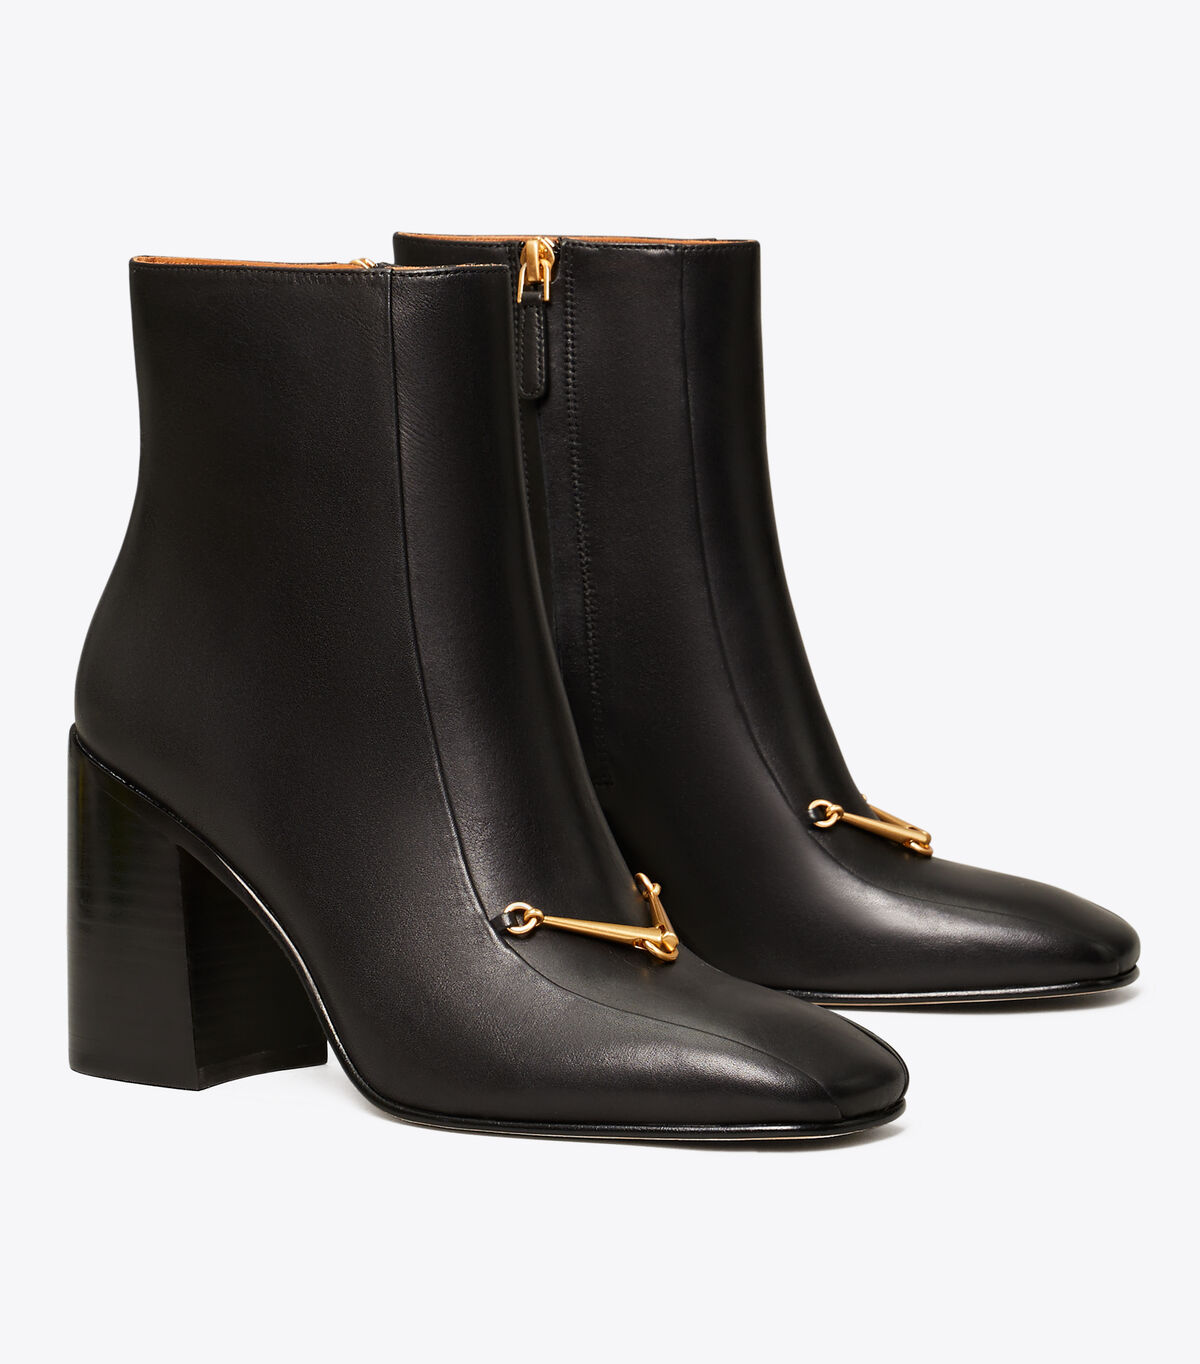 Equestrian Link Boot | Shoes | Tory Burch